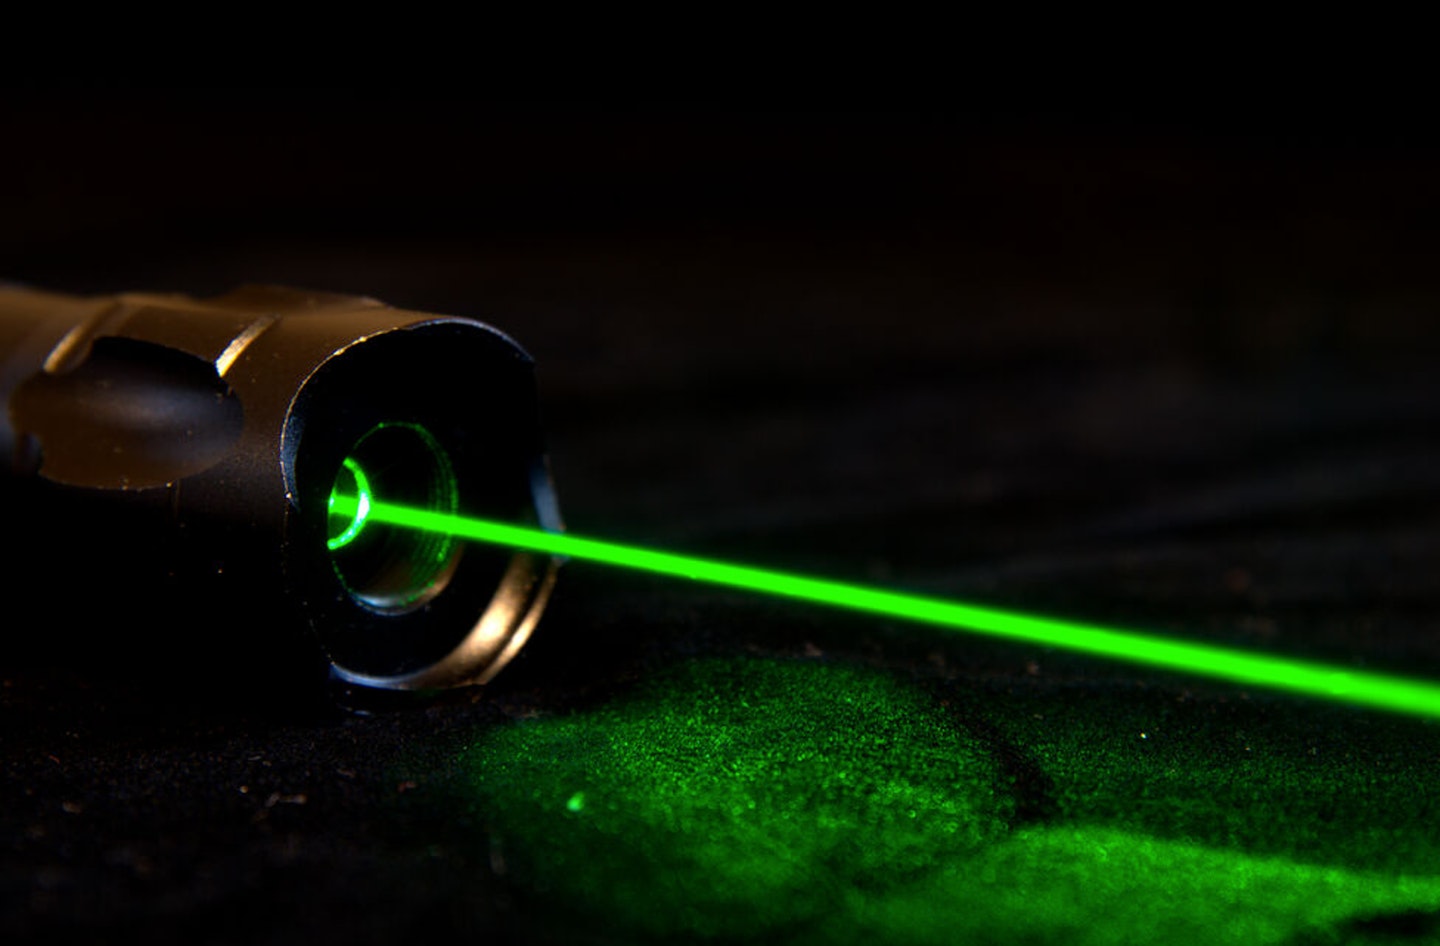 Laser pointers can be deployed to scare off birds